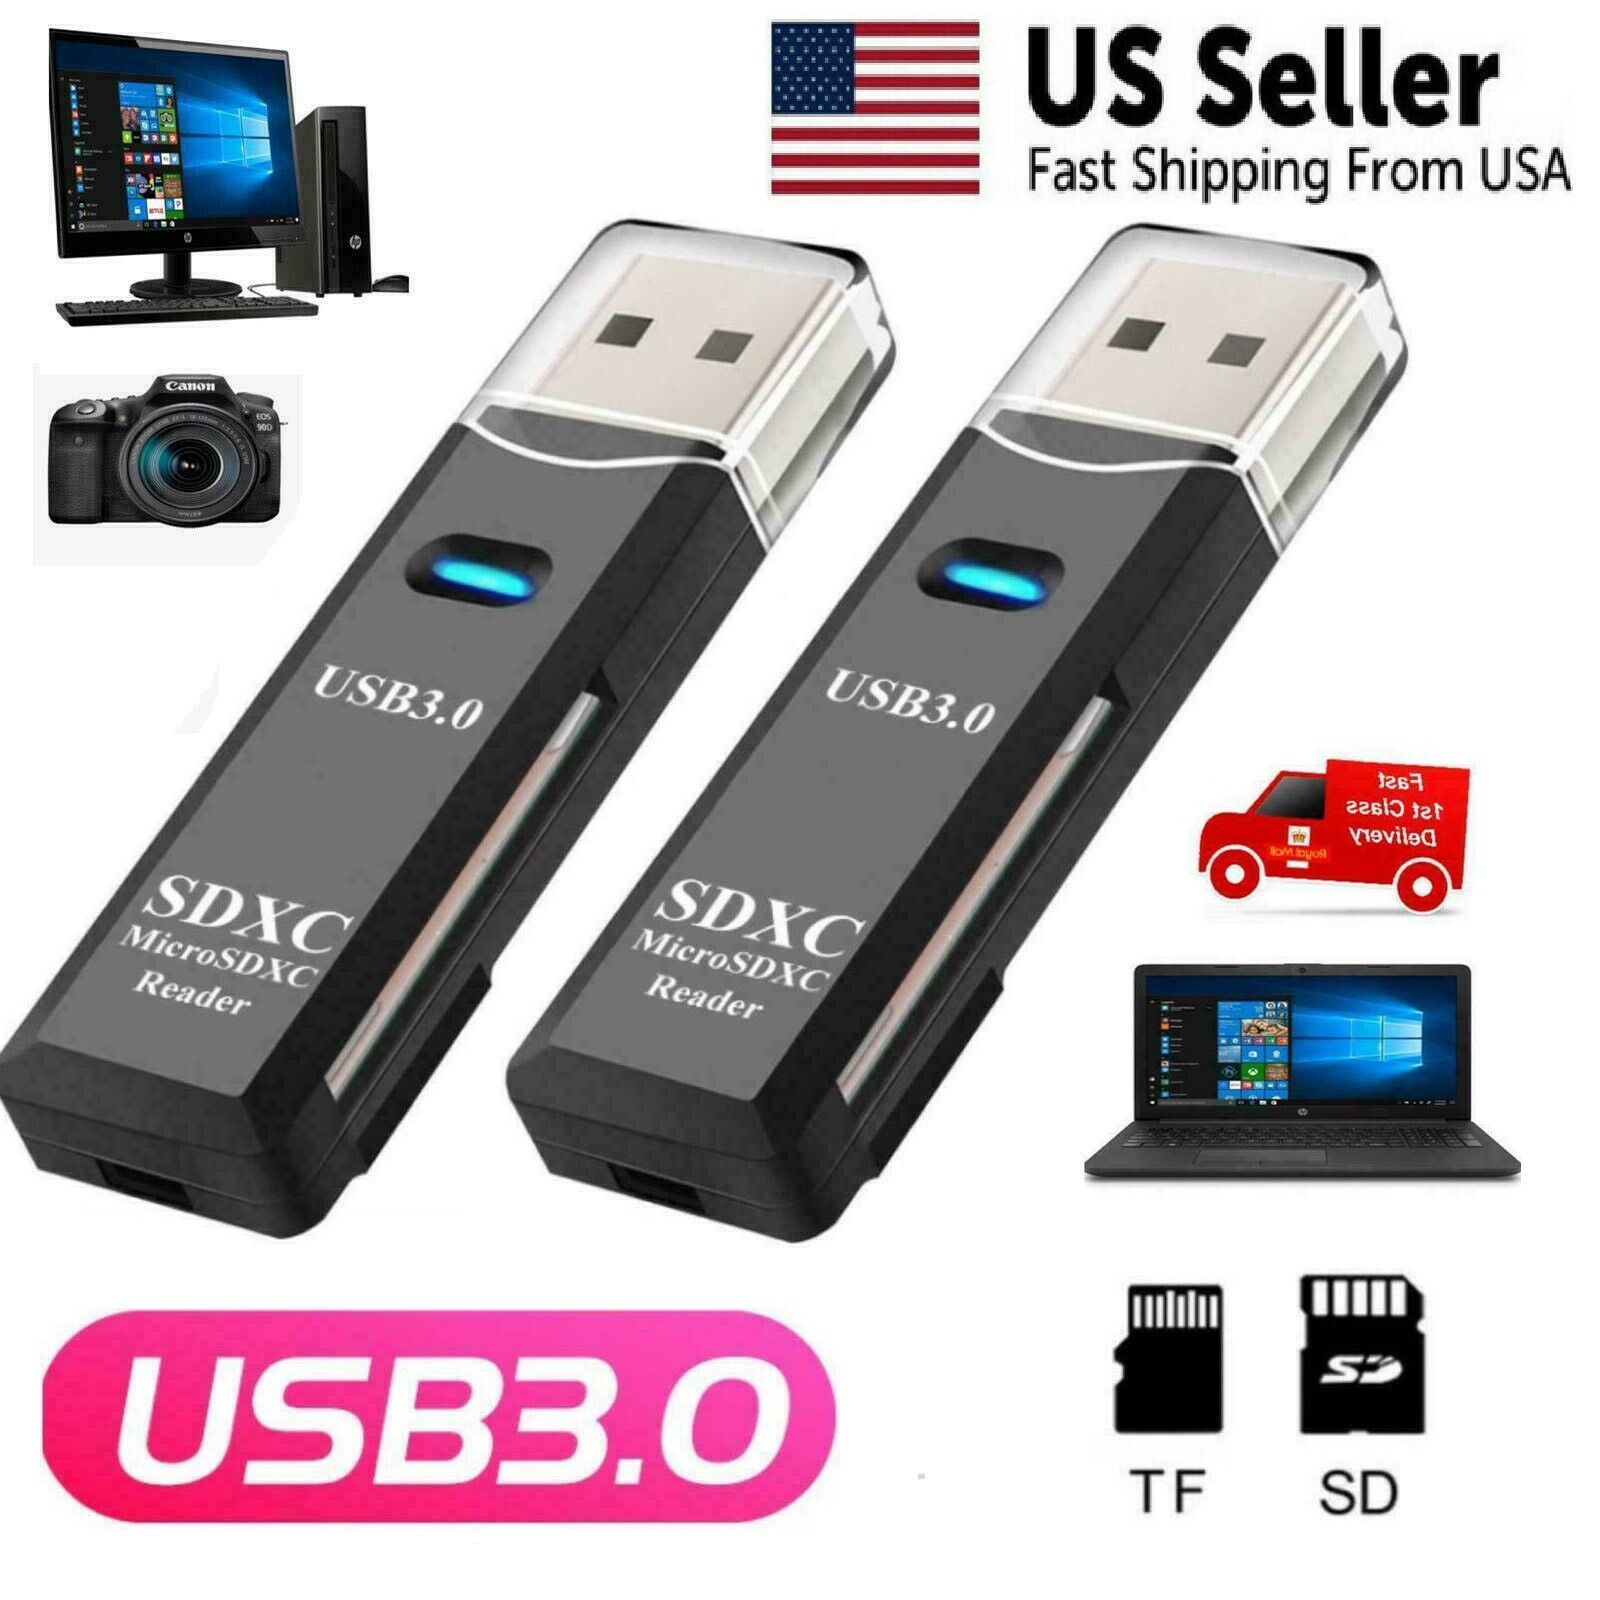 2Pcs USB 3.0 2 in 1 HighSpeed Memory Card Reader Adapter for Micro SD SDXC TF US